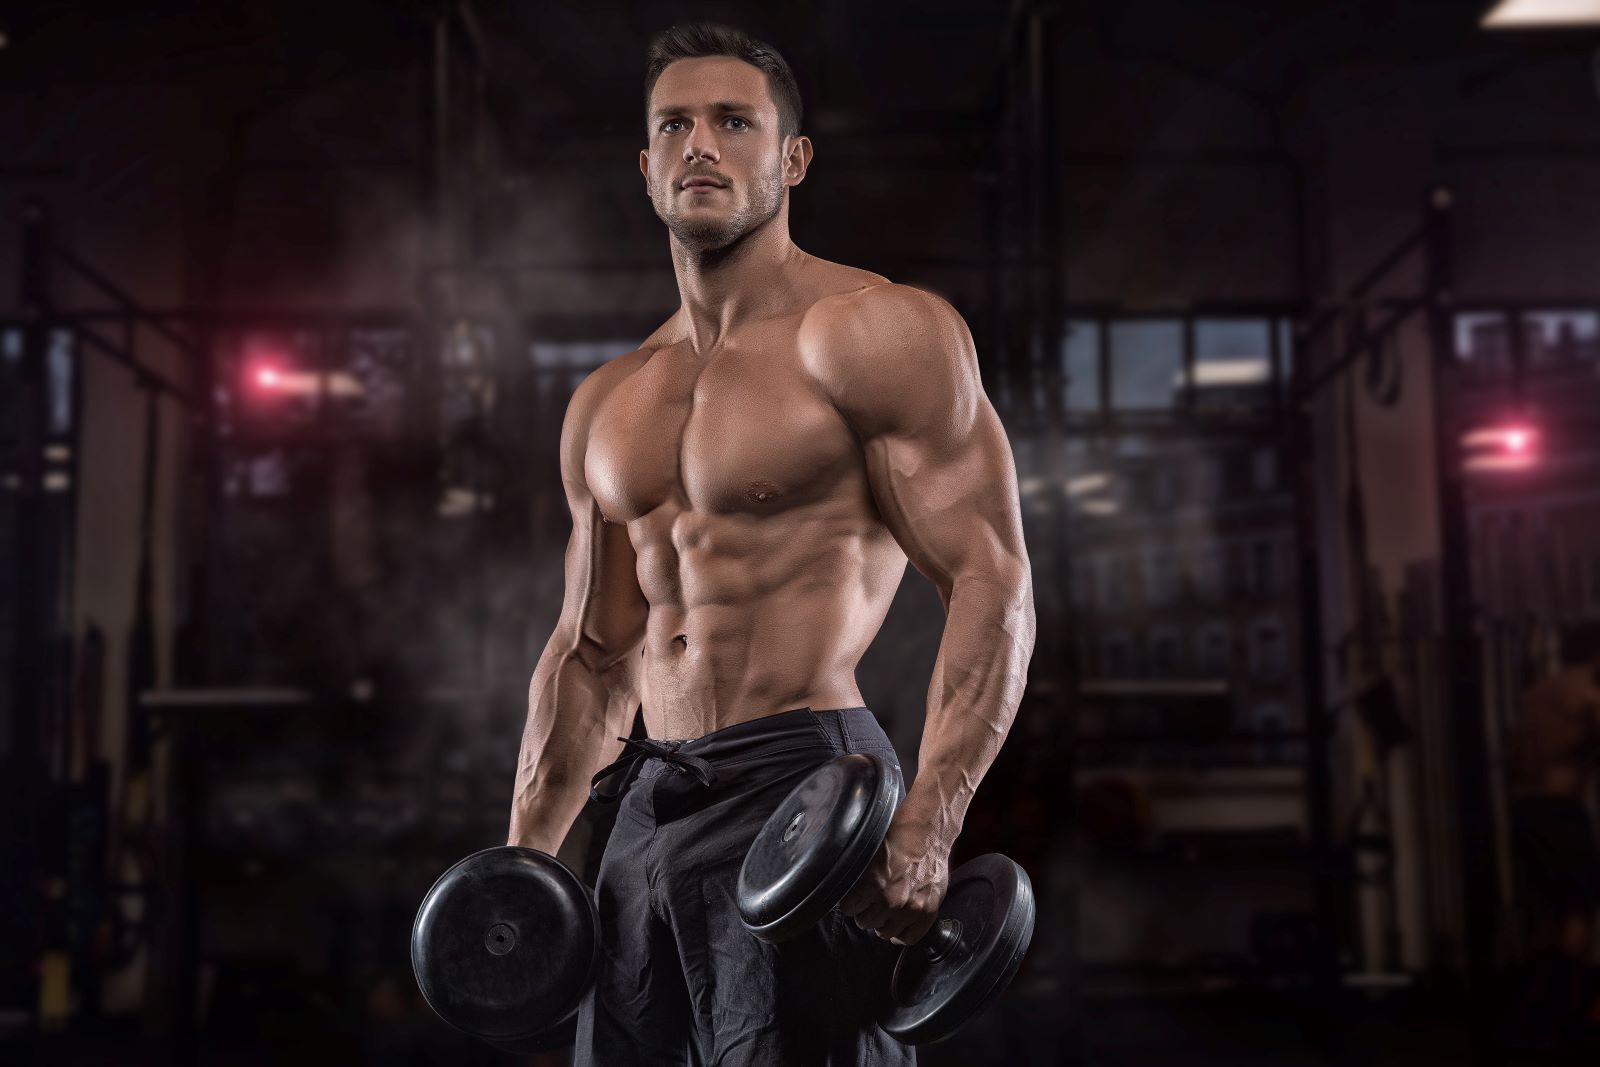 LEAN MUSCLE VS BULKY MUSCLE: HOW TO GET YOUR DESIRED BODY 